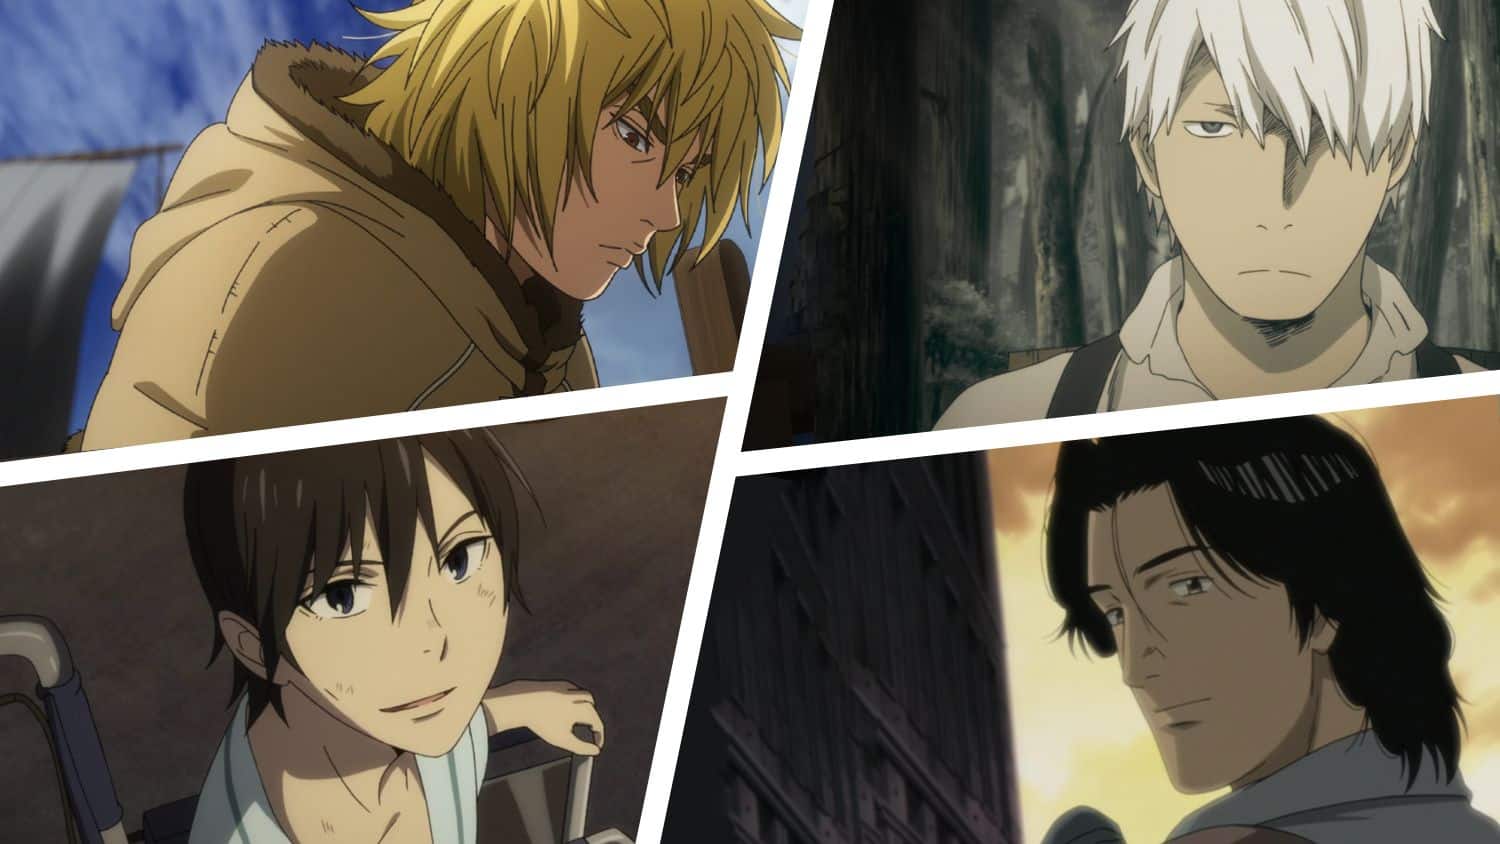 Collage of Seinen anime protagonists